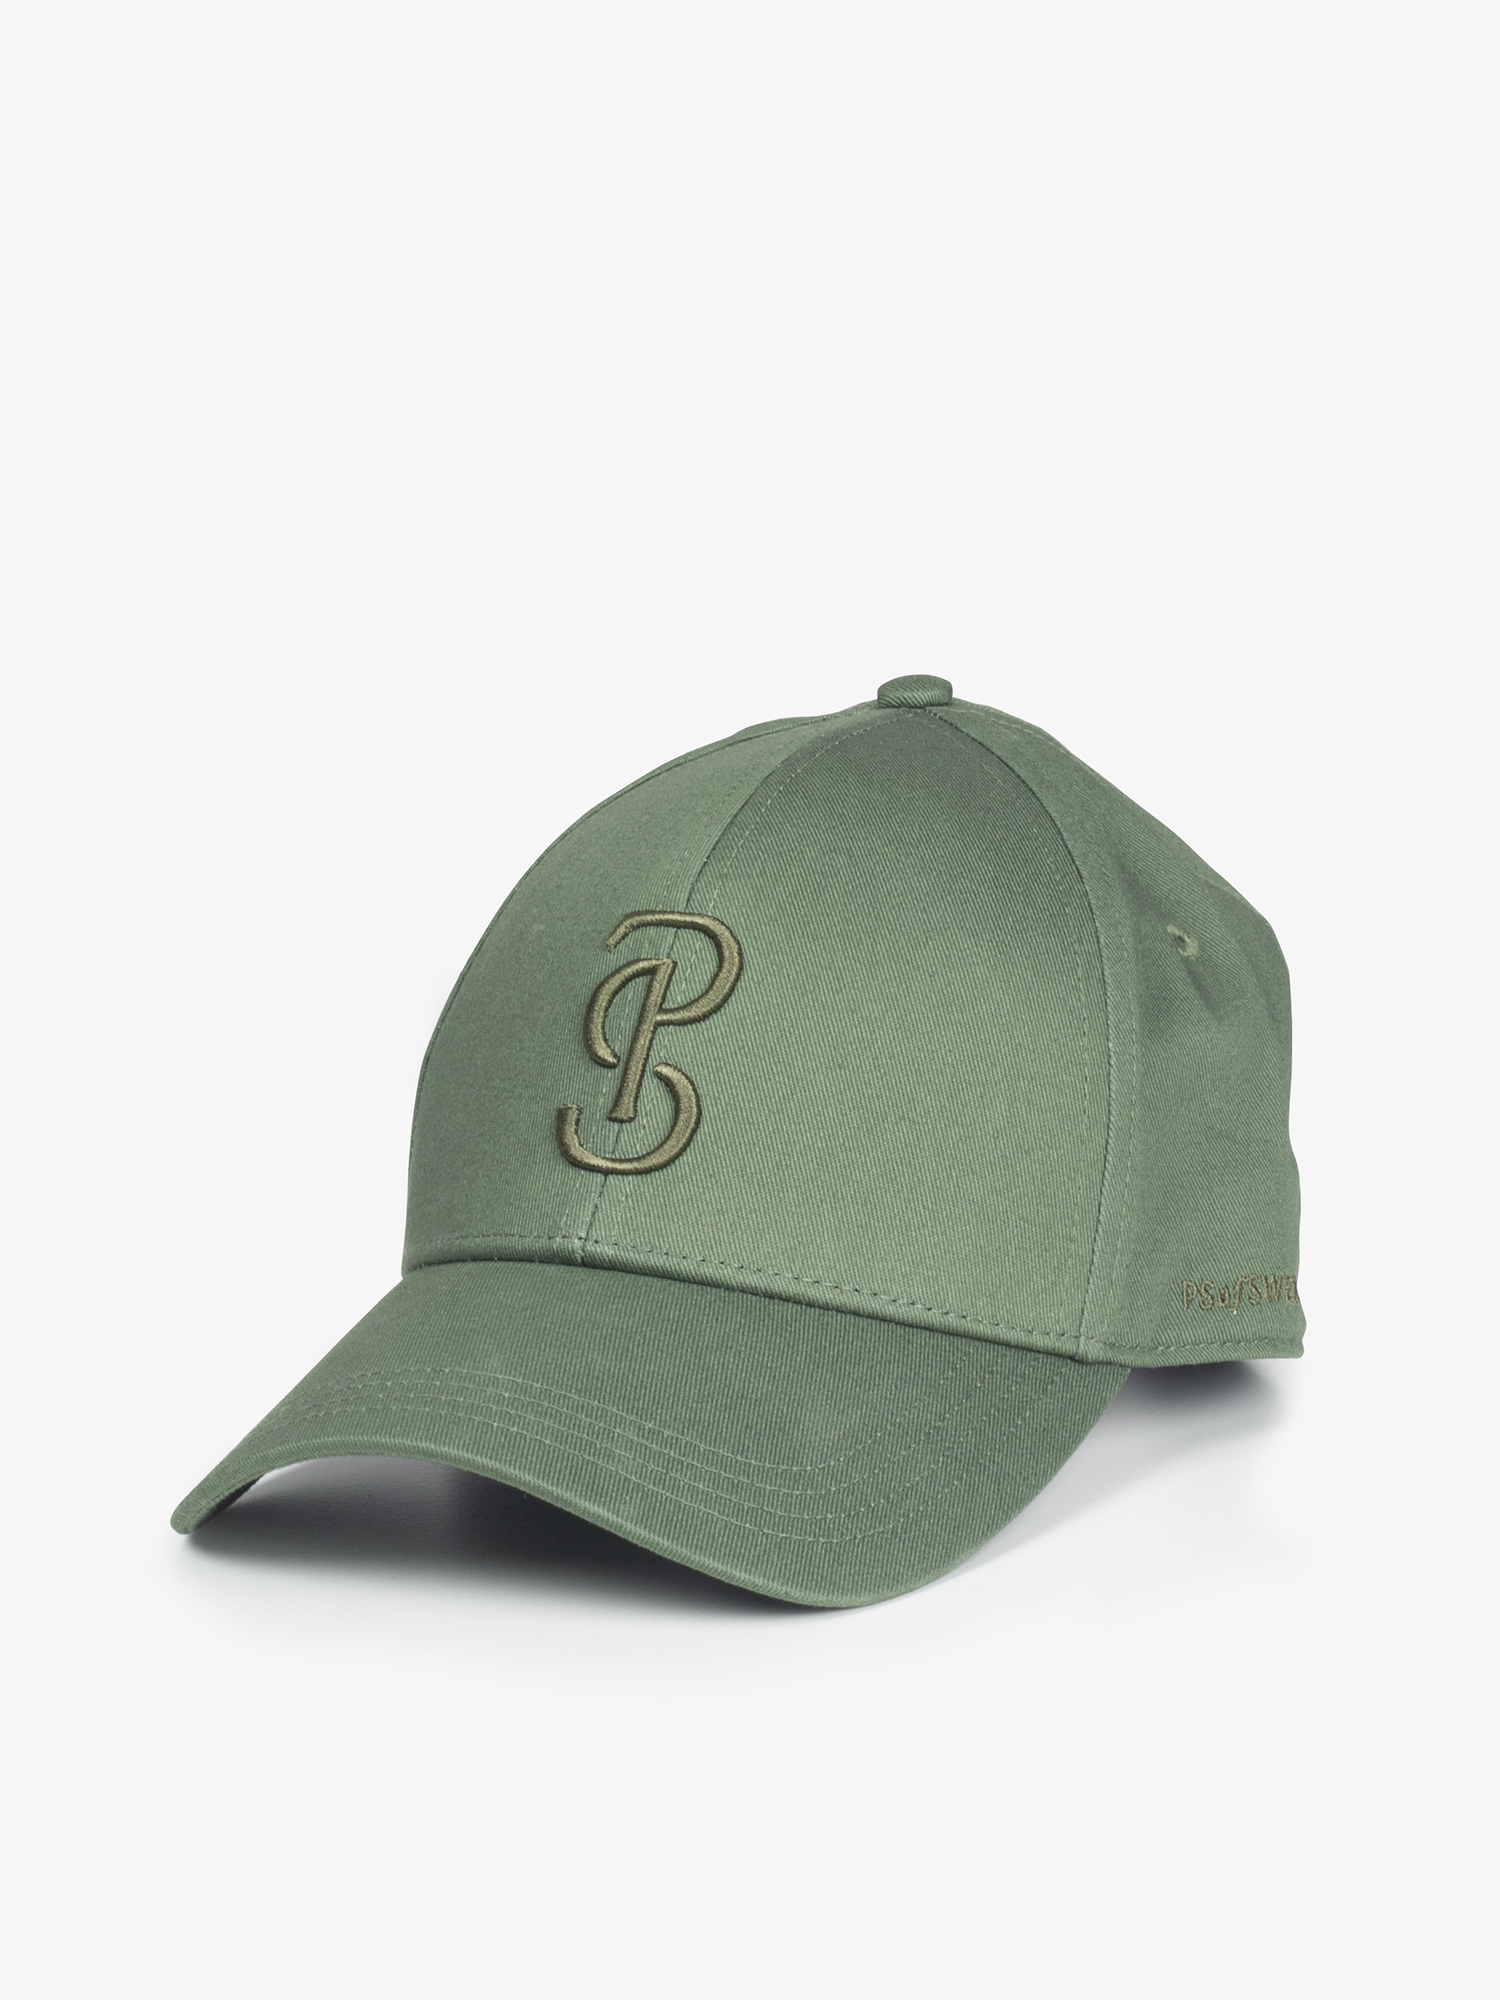 TH Embroidered Cap: Green